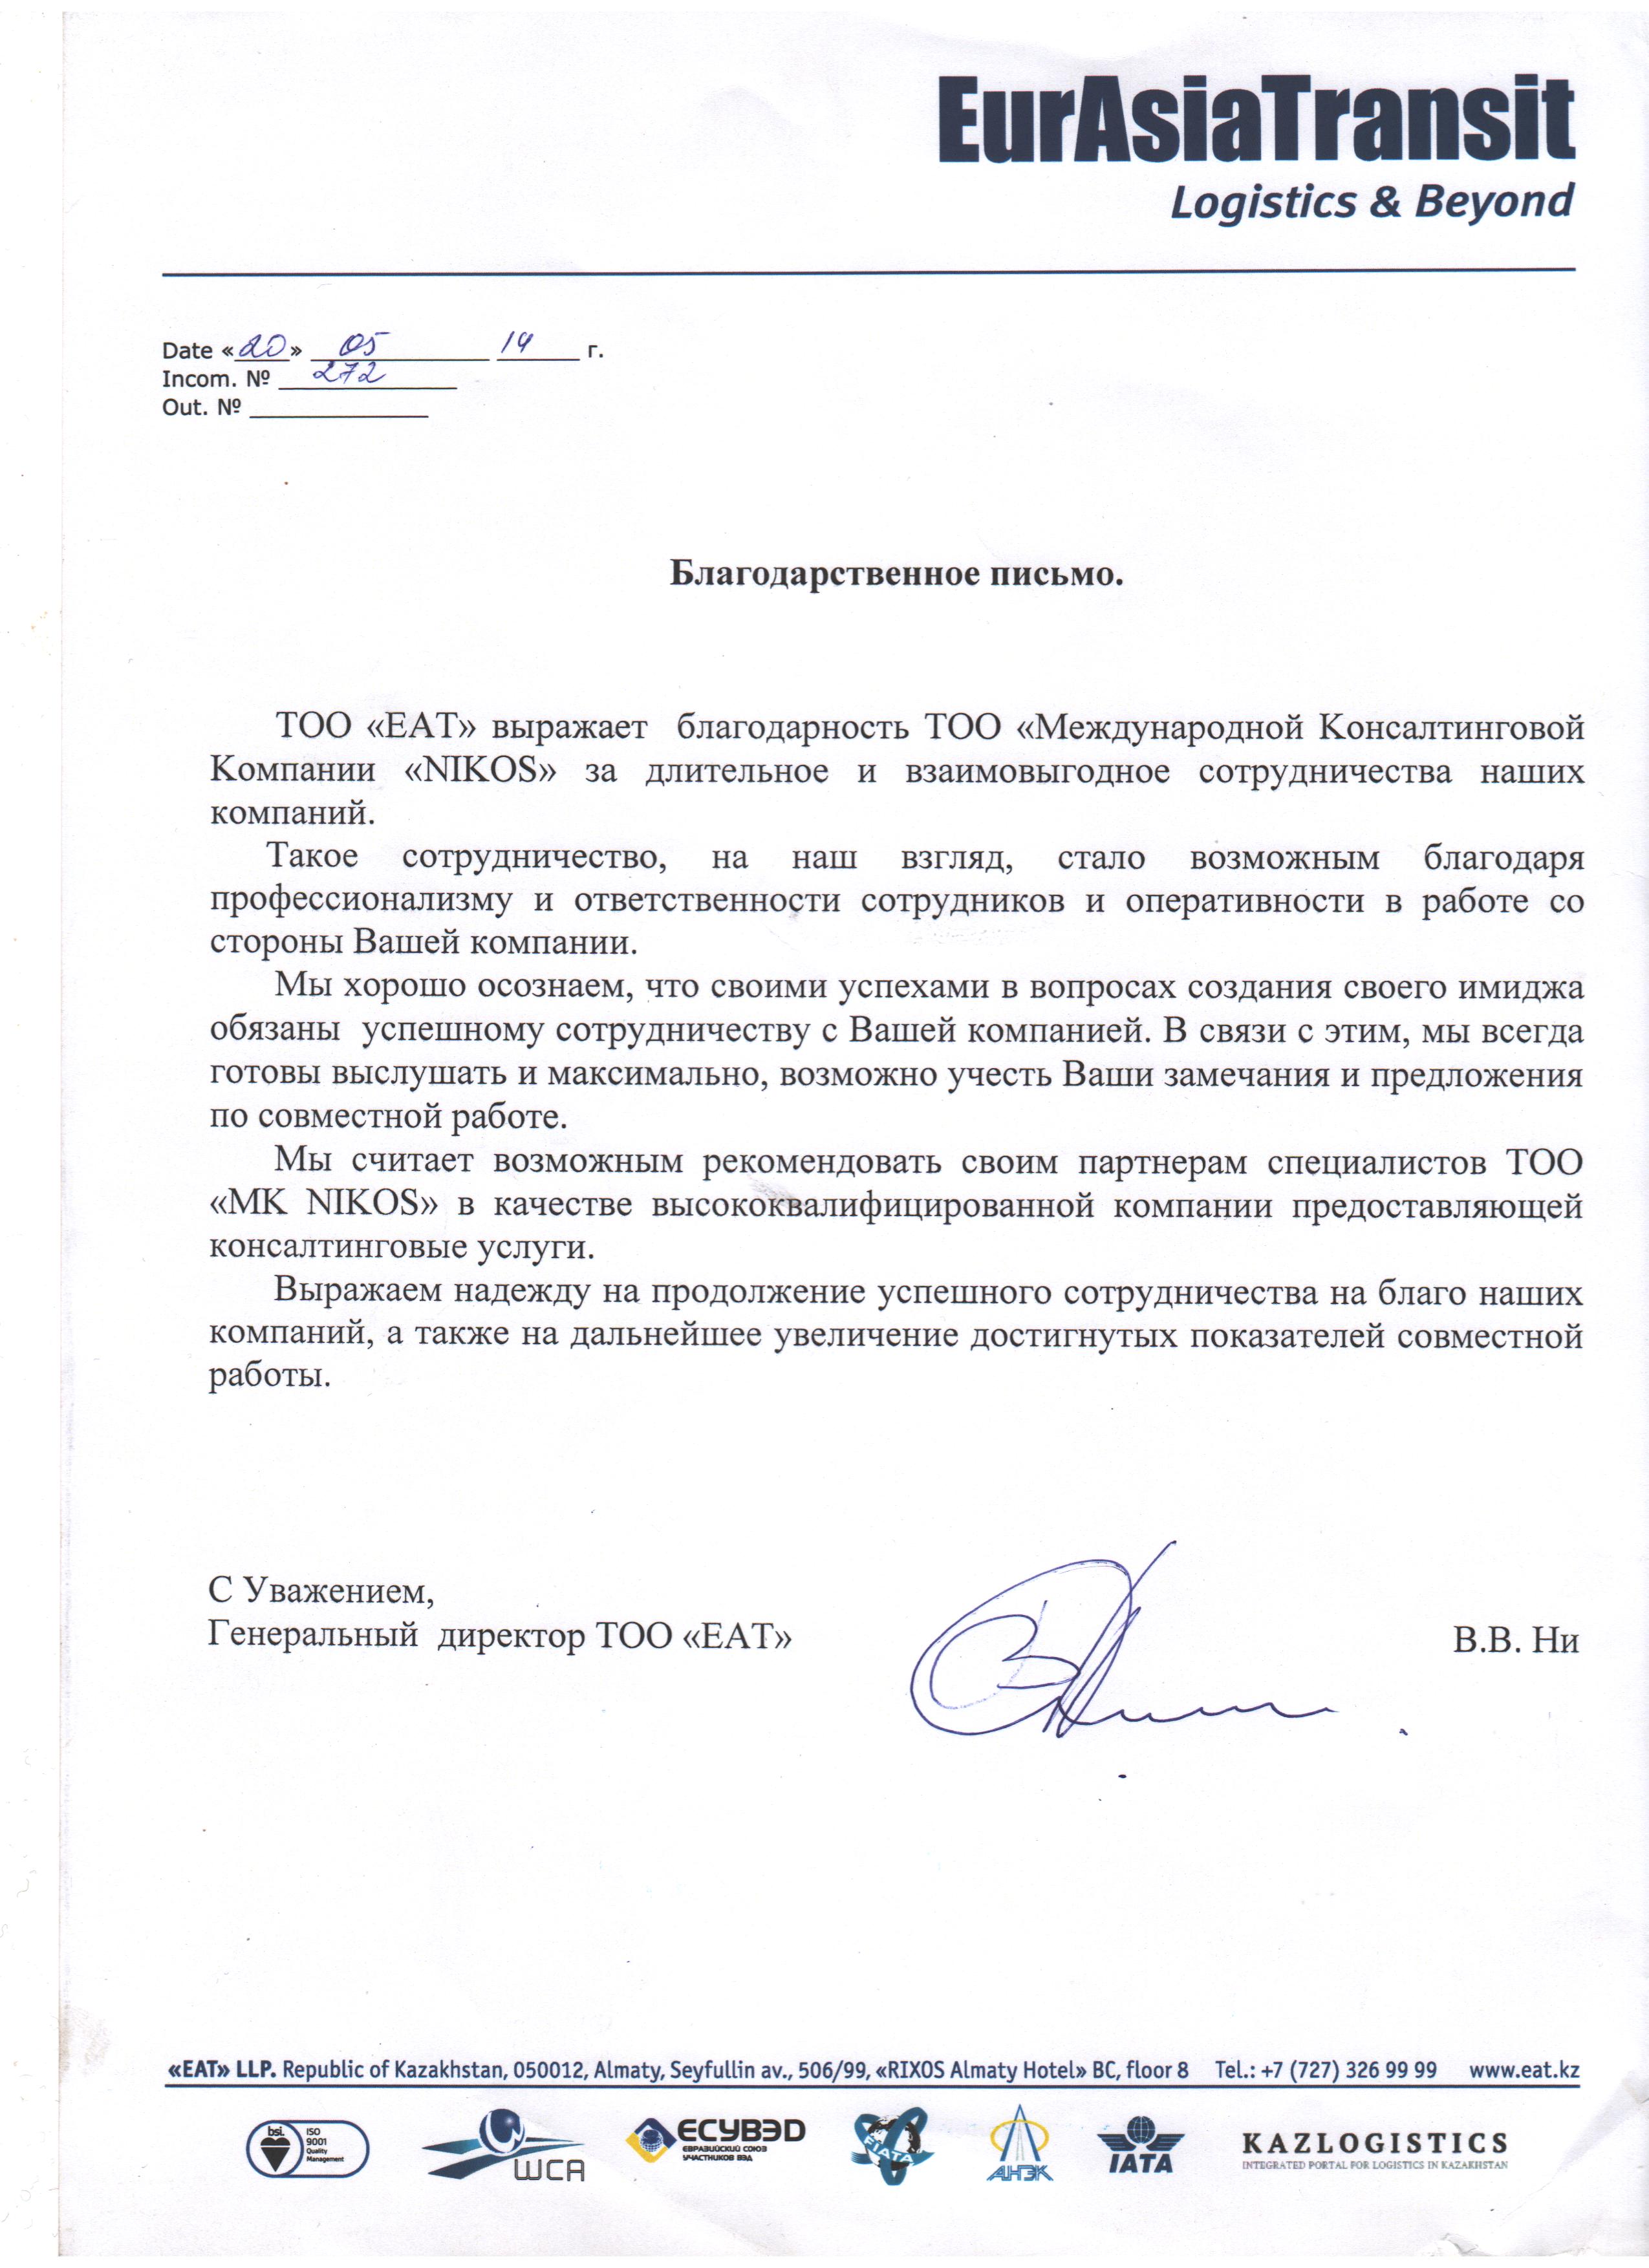 Letter of appreciation from ЕАТ LLP